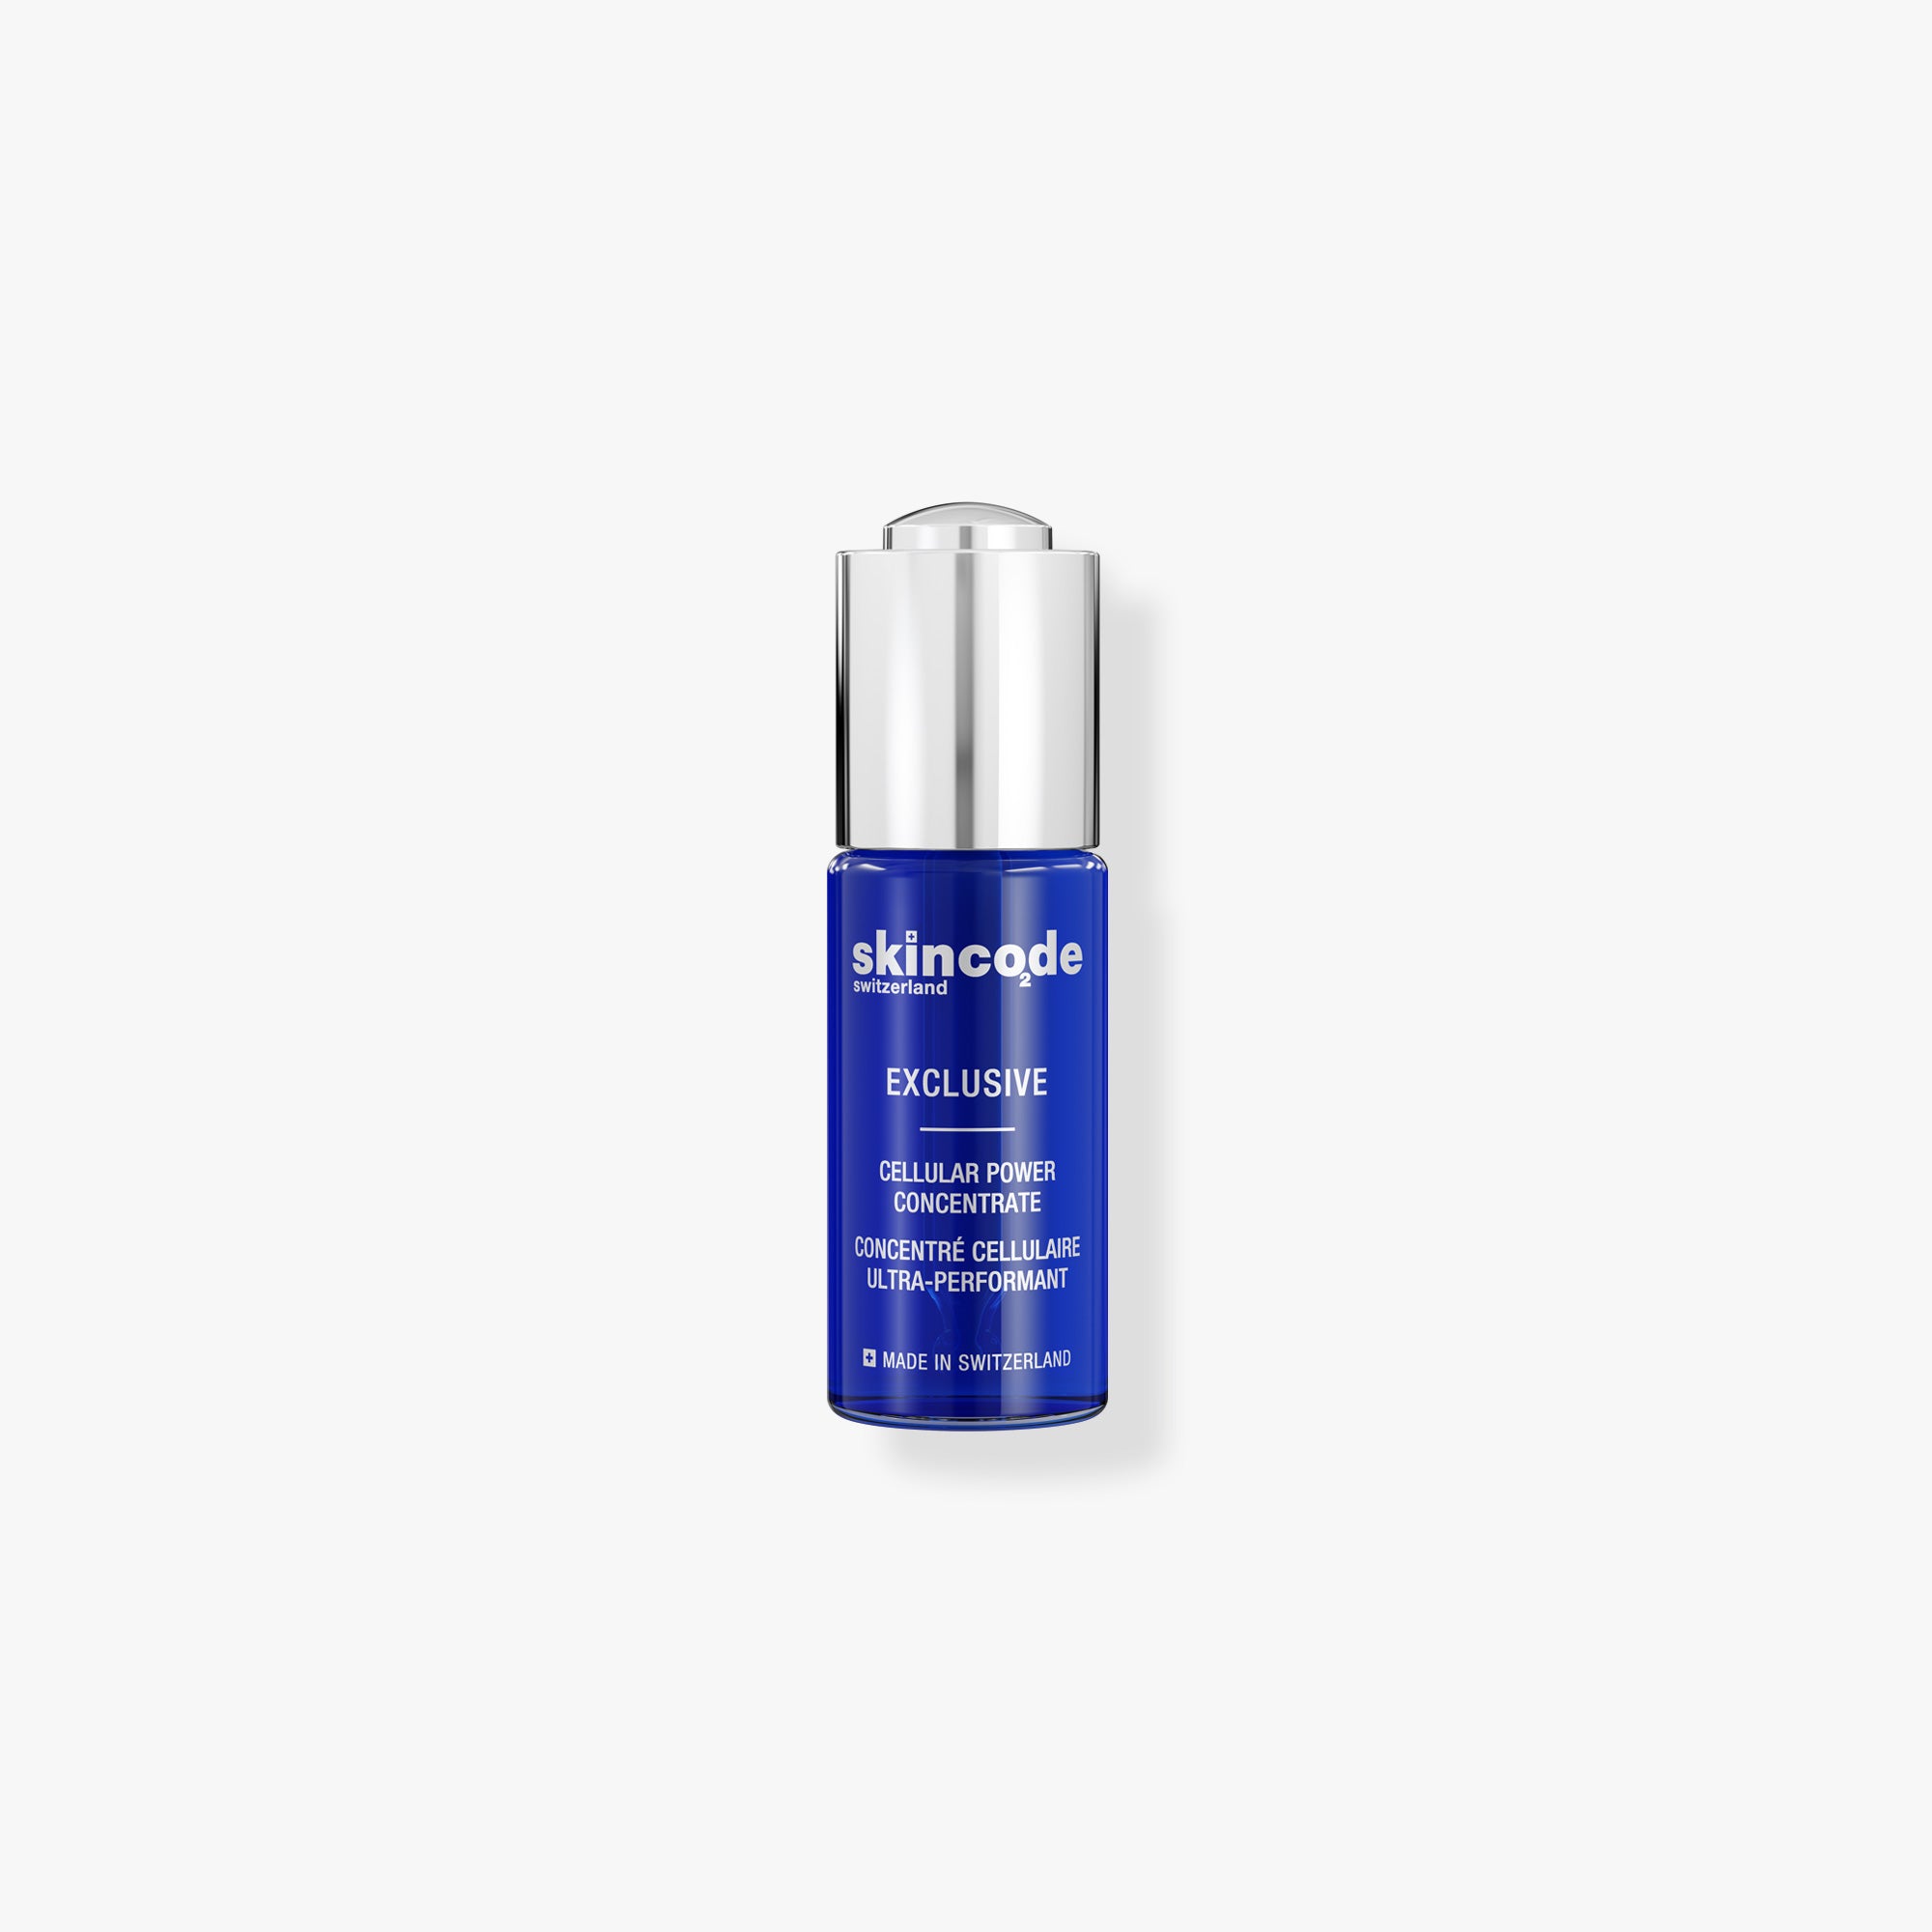 SkinCode Exclusive, Cellular Power Concentrate